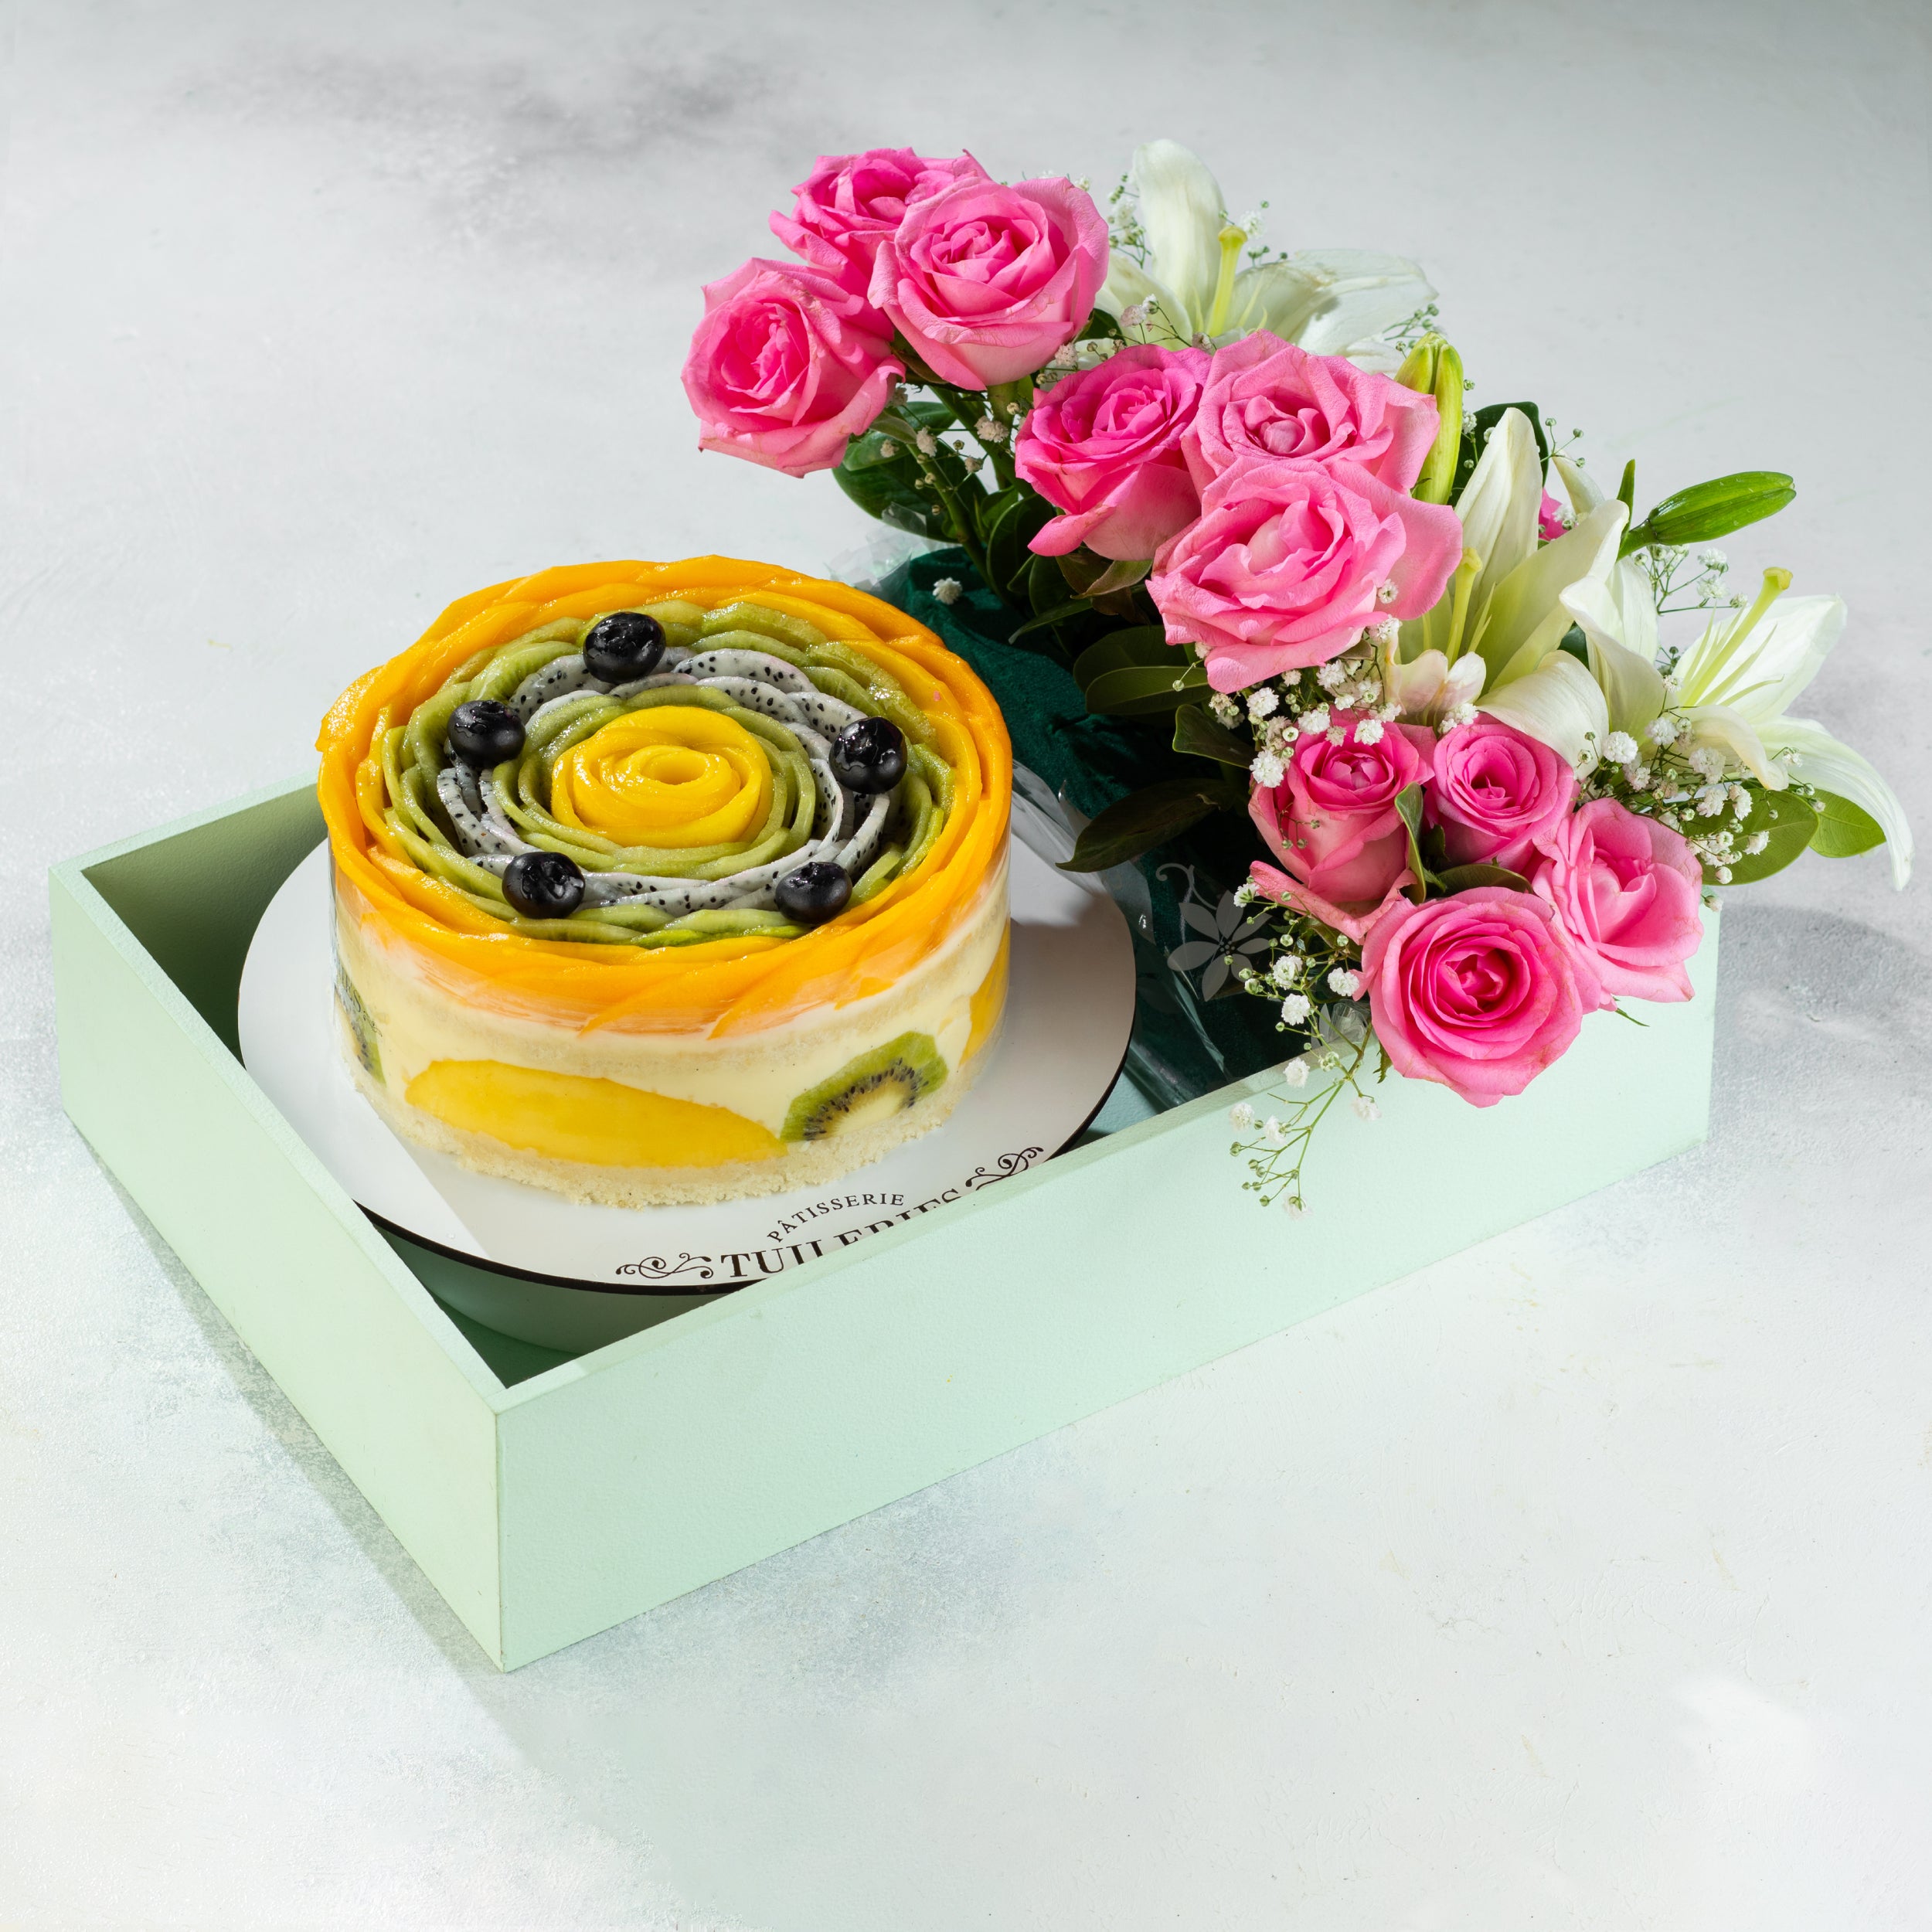 Mothers Day Special: Fresh Fruit Cake and Fresh Flowers Basket